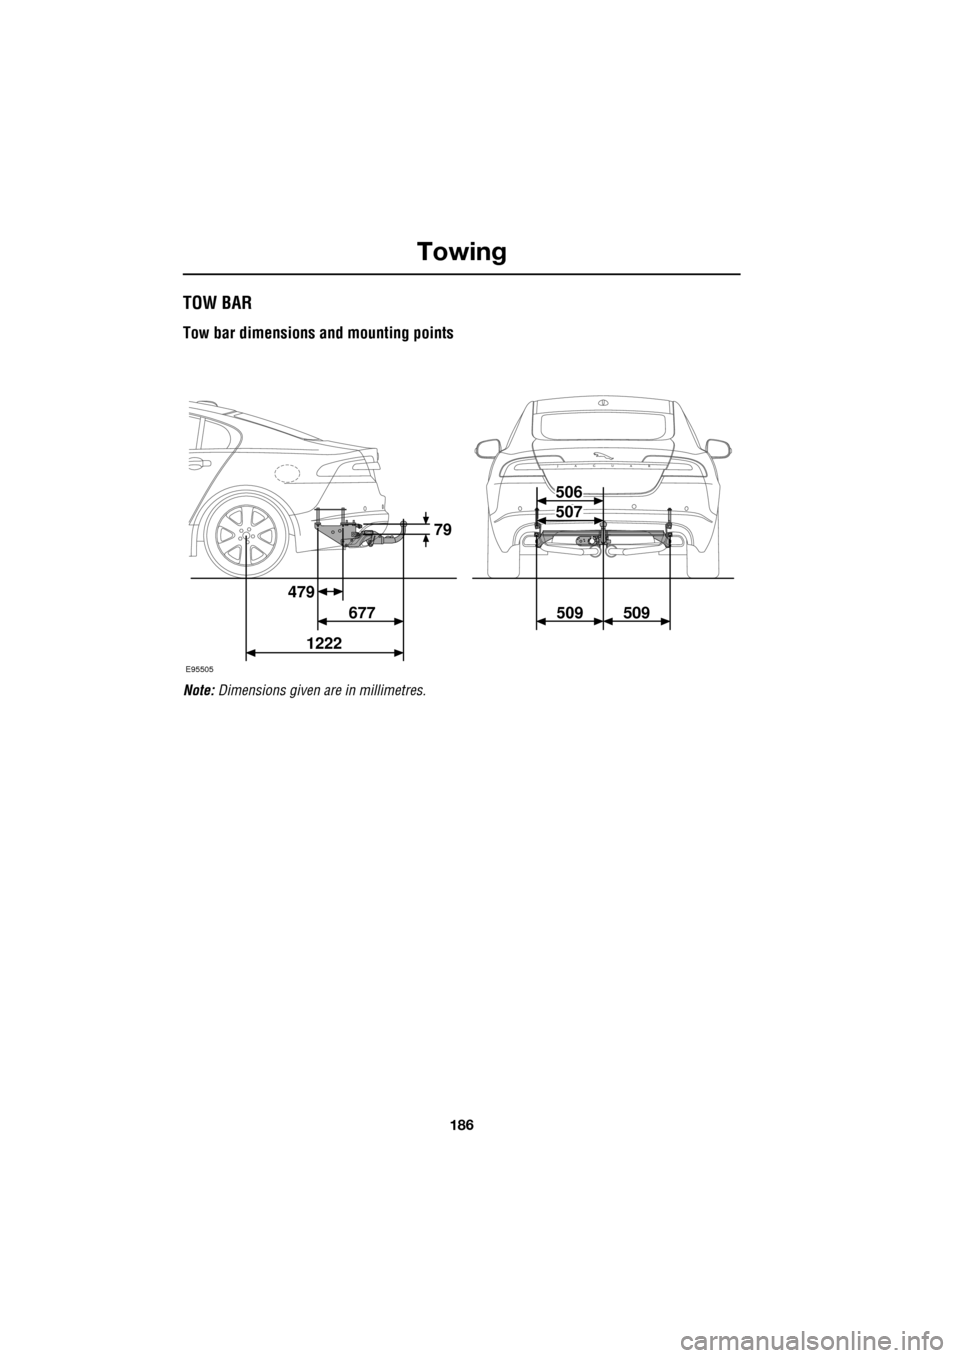 JAGUAR XF 2009 1.G Owners Manual Towing
186
               
TOW BAR
Tow bar dimensions and mounting points
Note: Dimensions given ar e in millimetres.
E95505
479
677 509 509
1222 79
506
507 